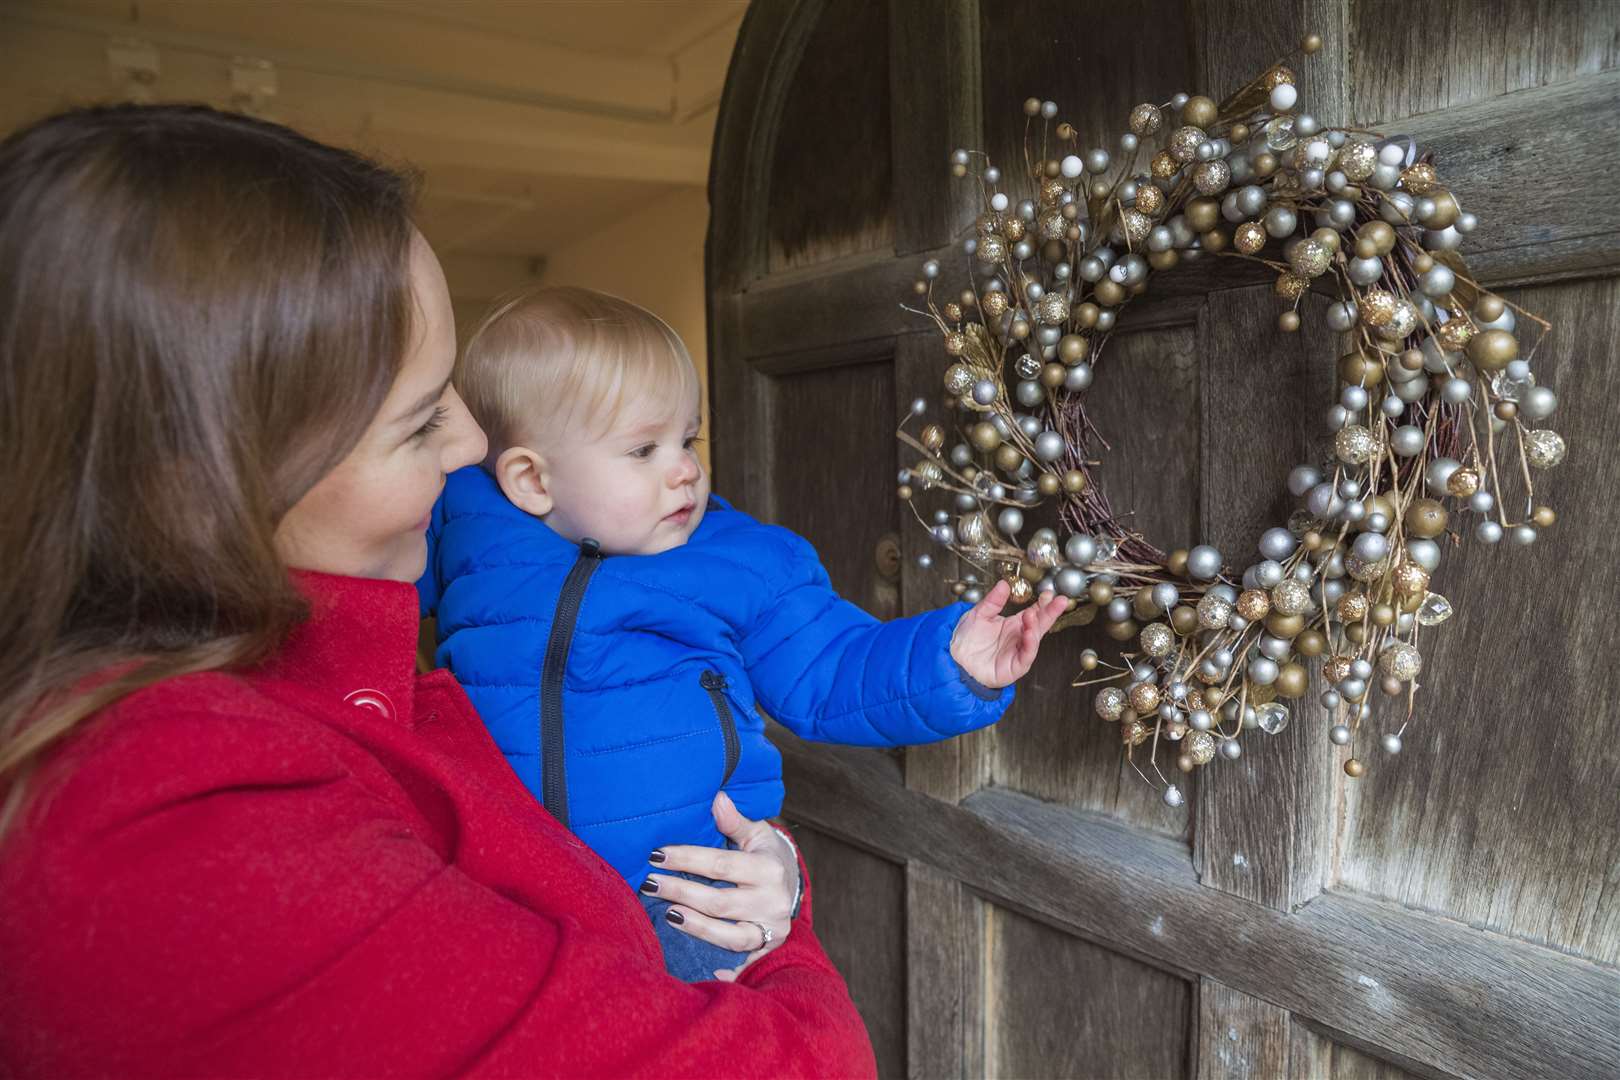 Visitors at Knole in Sevenoaks Picture: National Trust Images/James Dobson